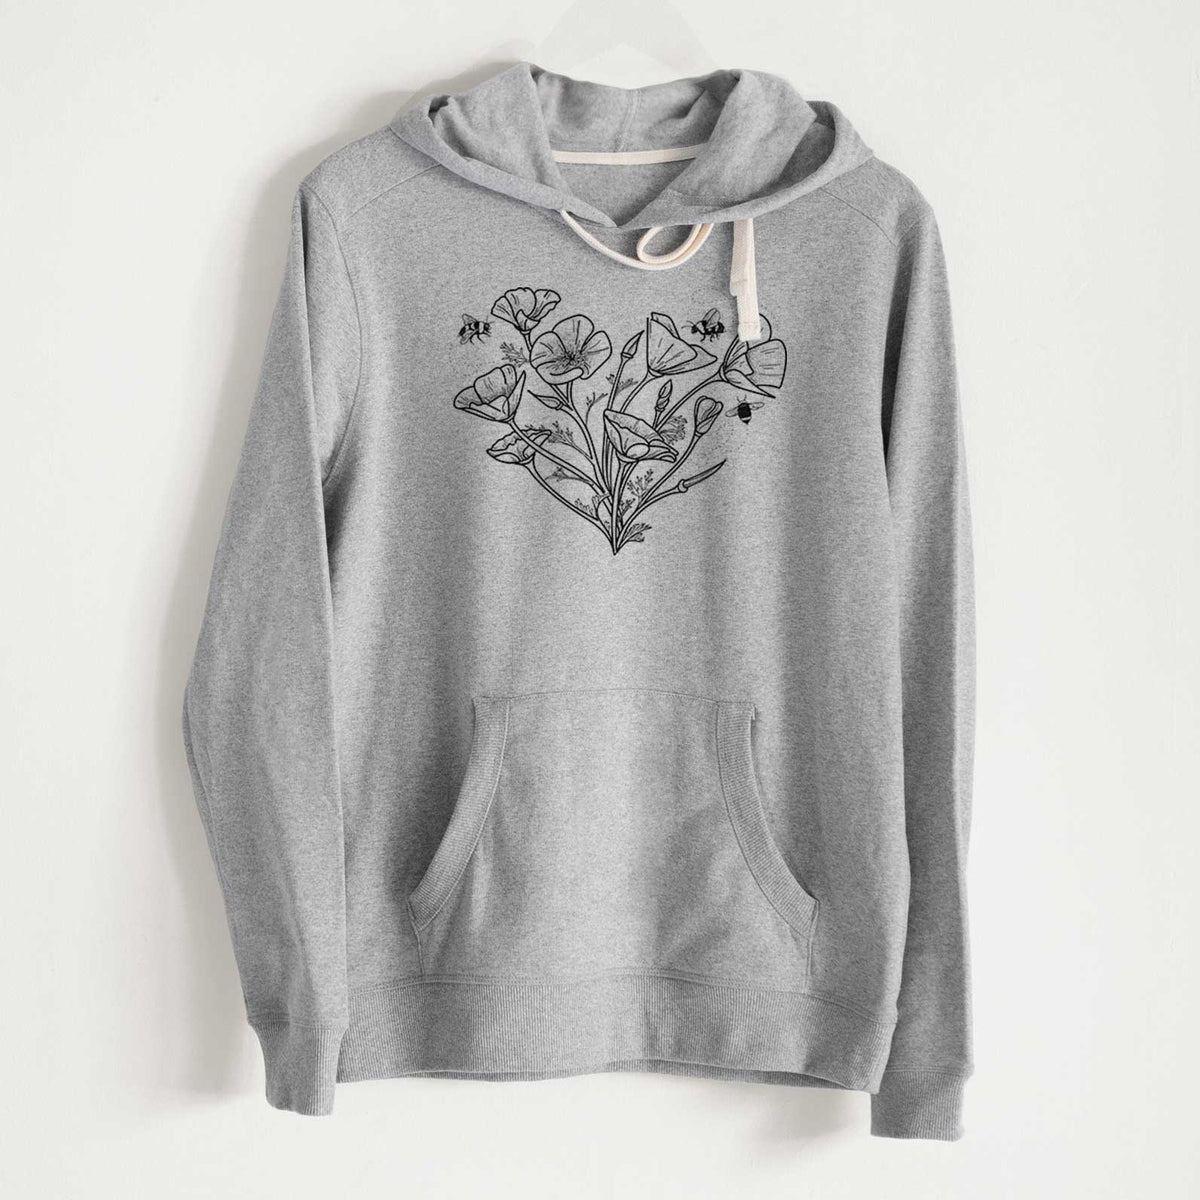 California Poppy Heart - Unisex Recycled Hoodie - CLOSEOUT - FINAL SALE